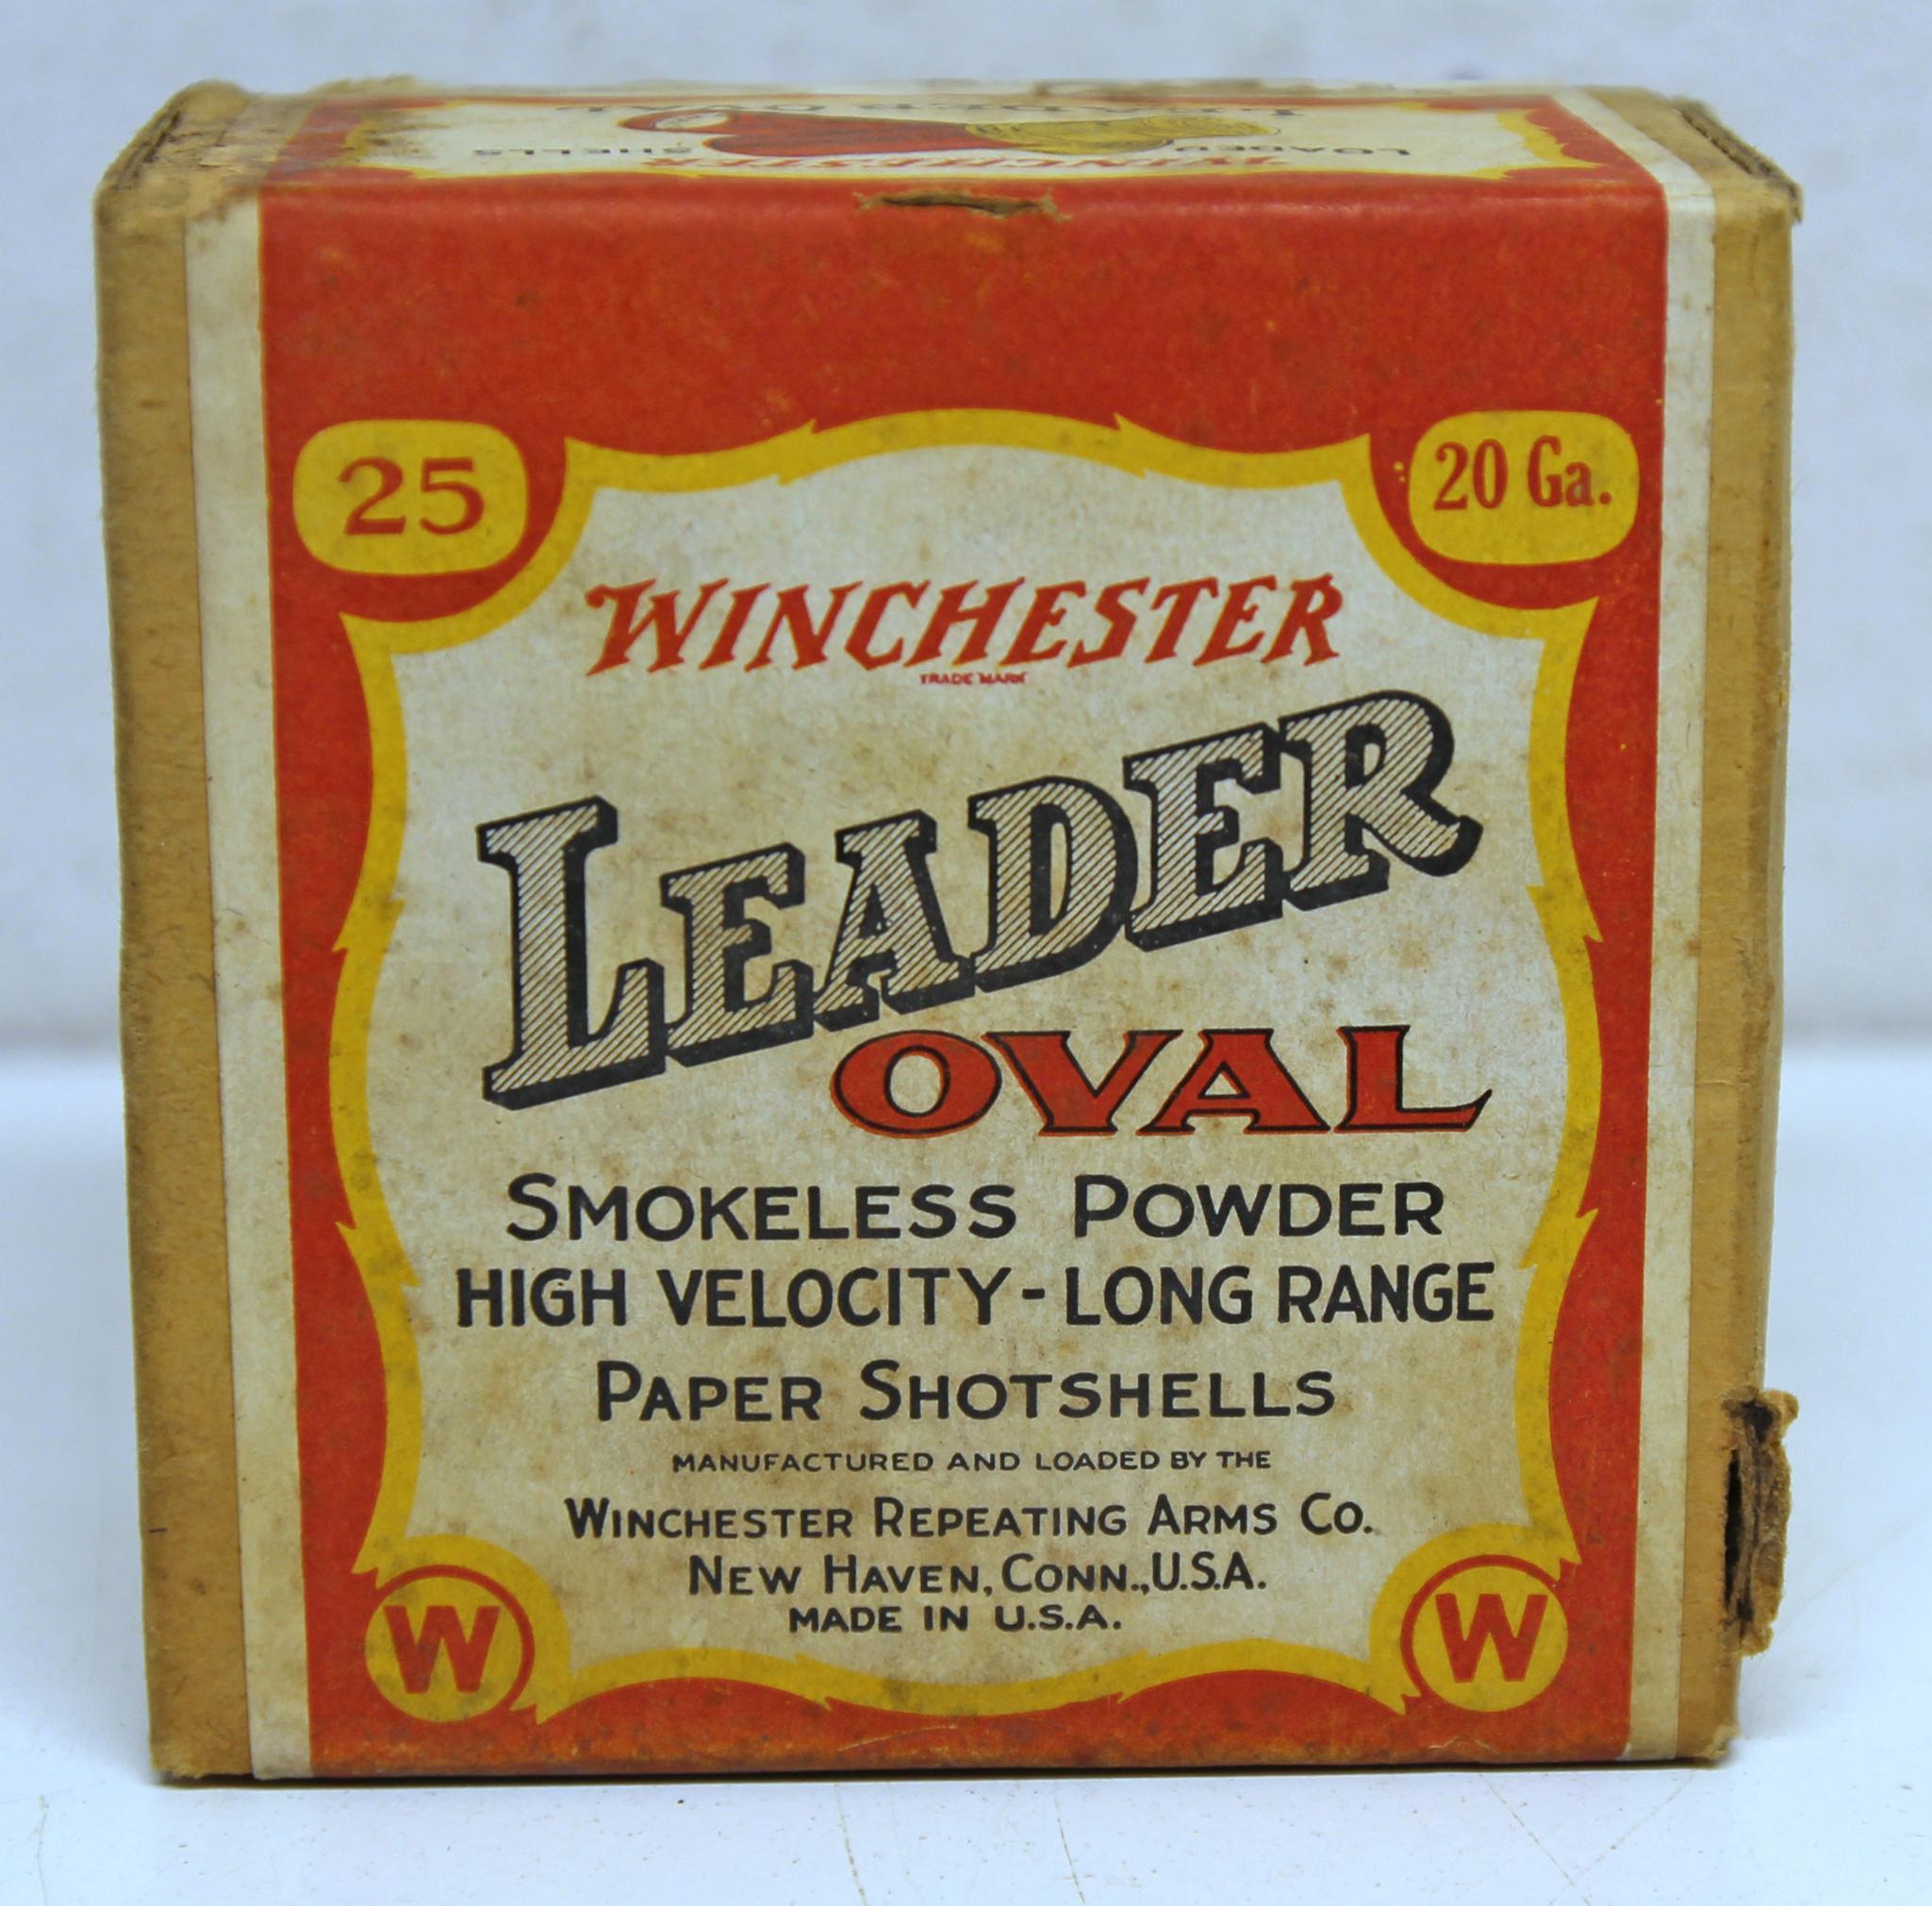 Full Vintage Sealed Two Piece Box Winchester